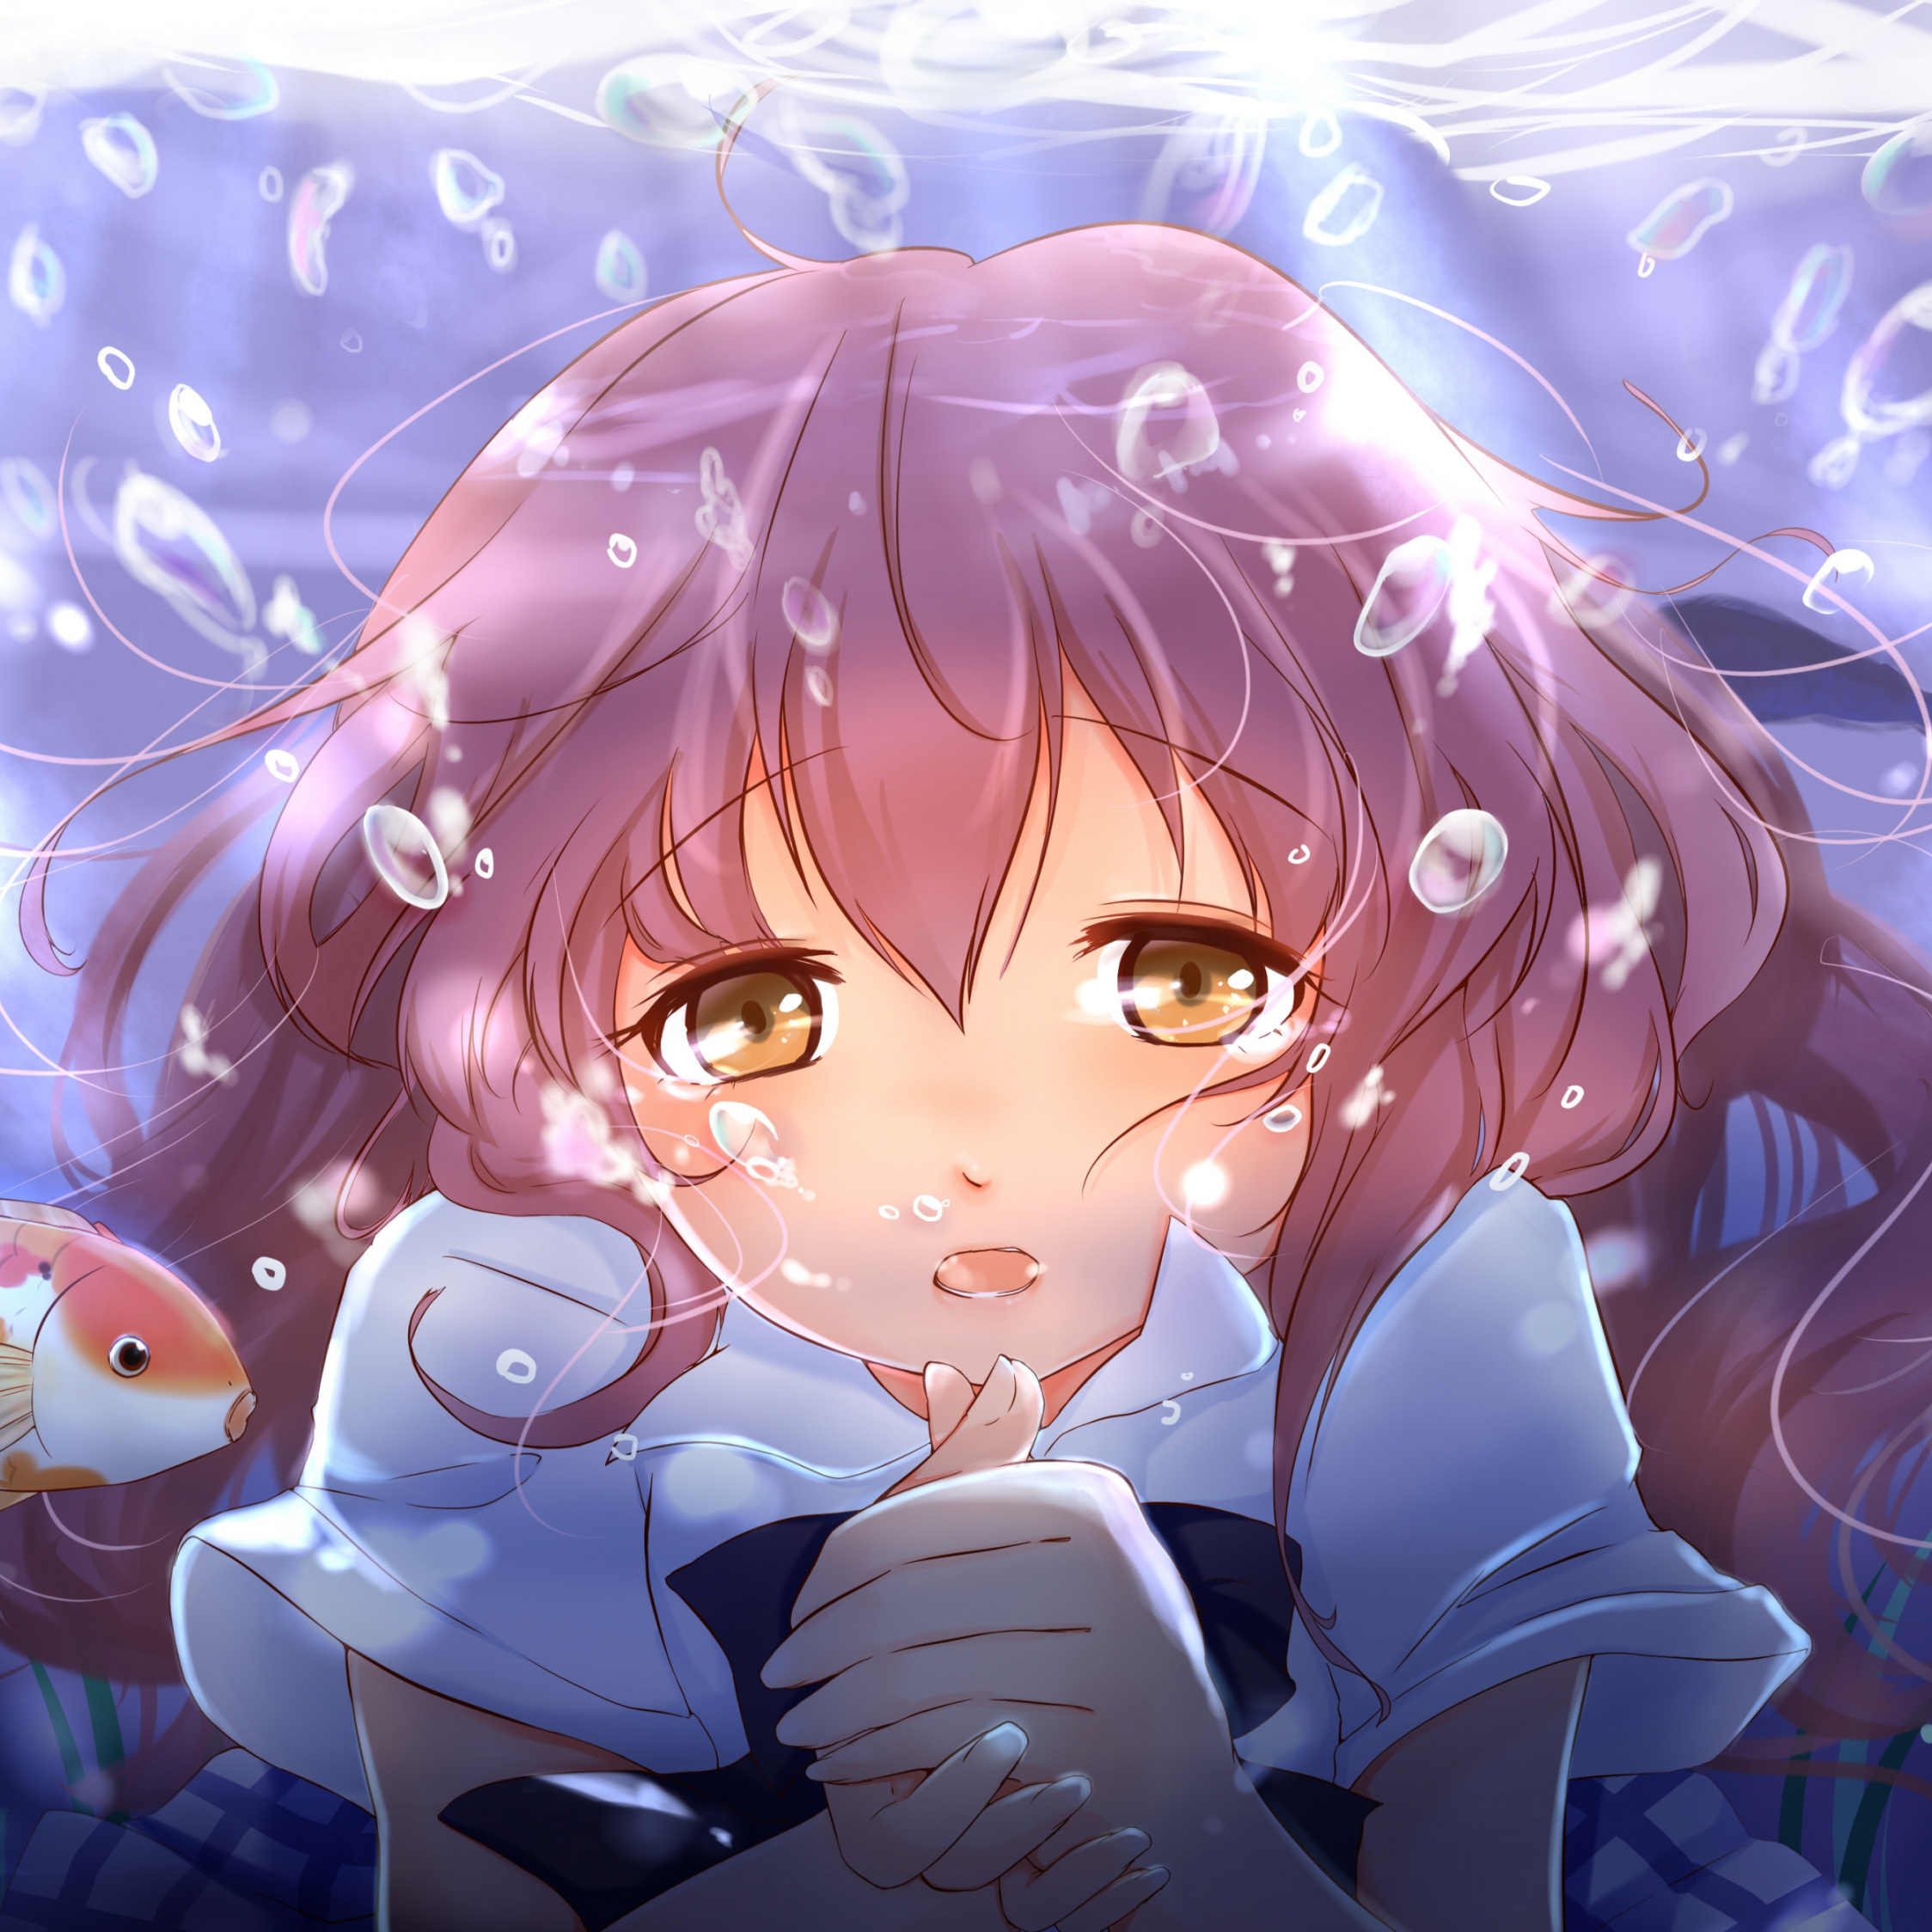 Download 2248x2248 wallpaper cute face, anime girl, underwater